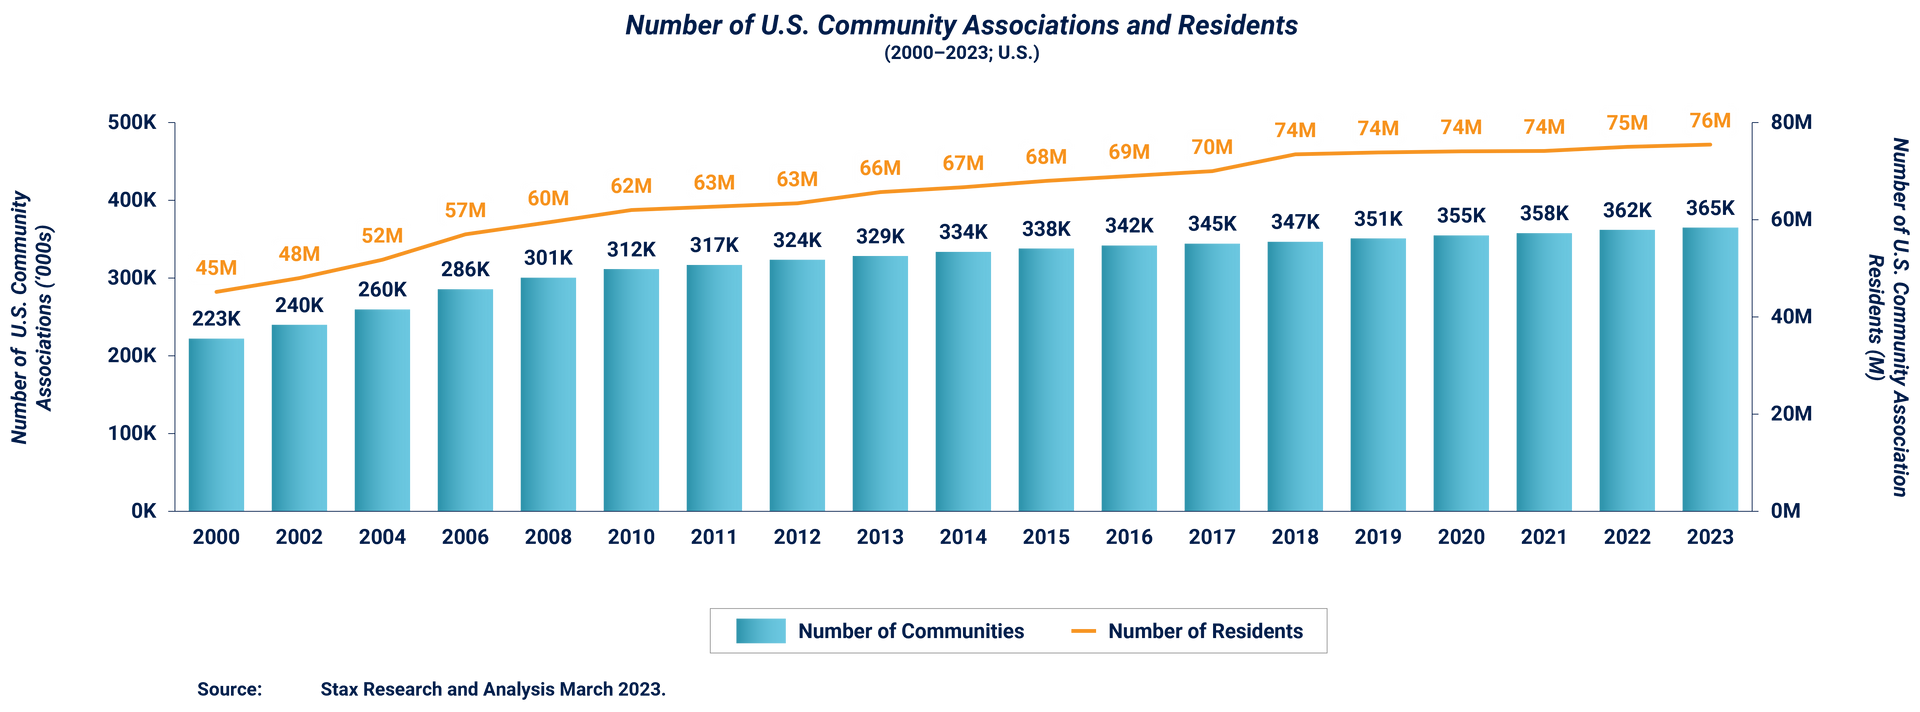 A bar chart depicting the number of U.S. community associations and residents. The trend line shows there has been steady growth from 2000-2023 in the US for community associations and residents. 